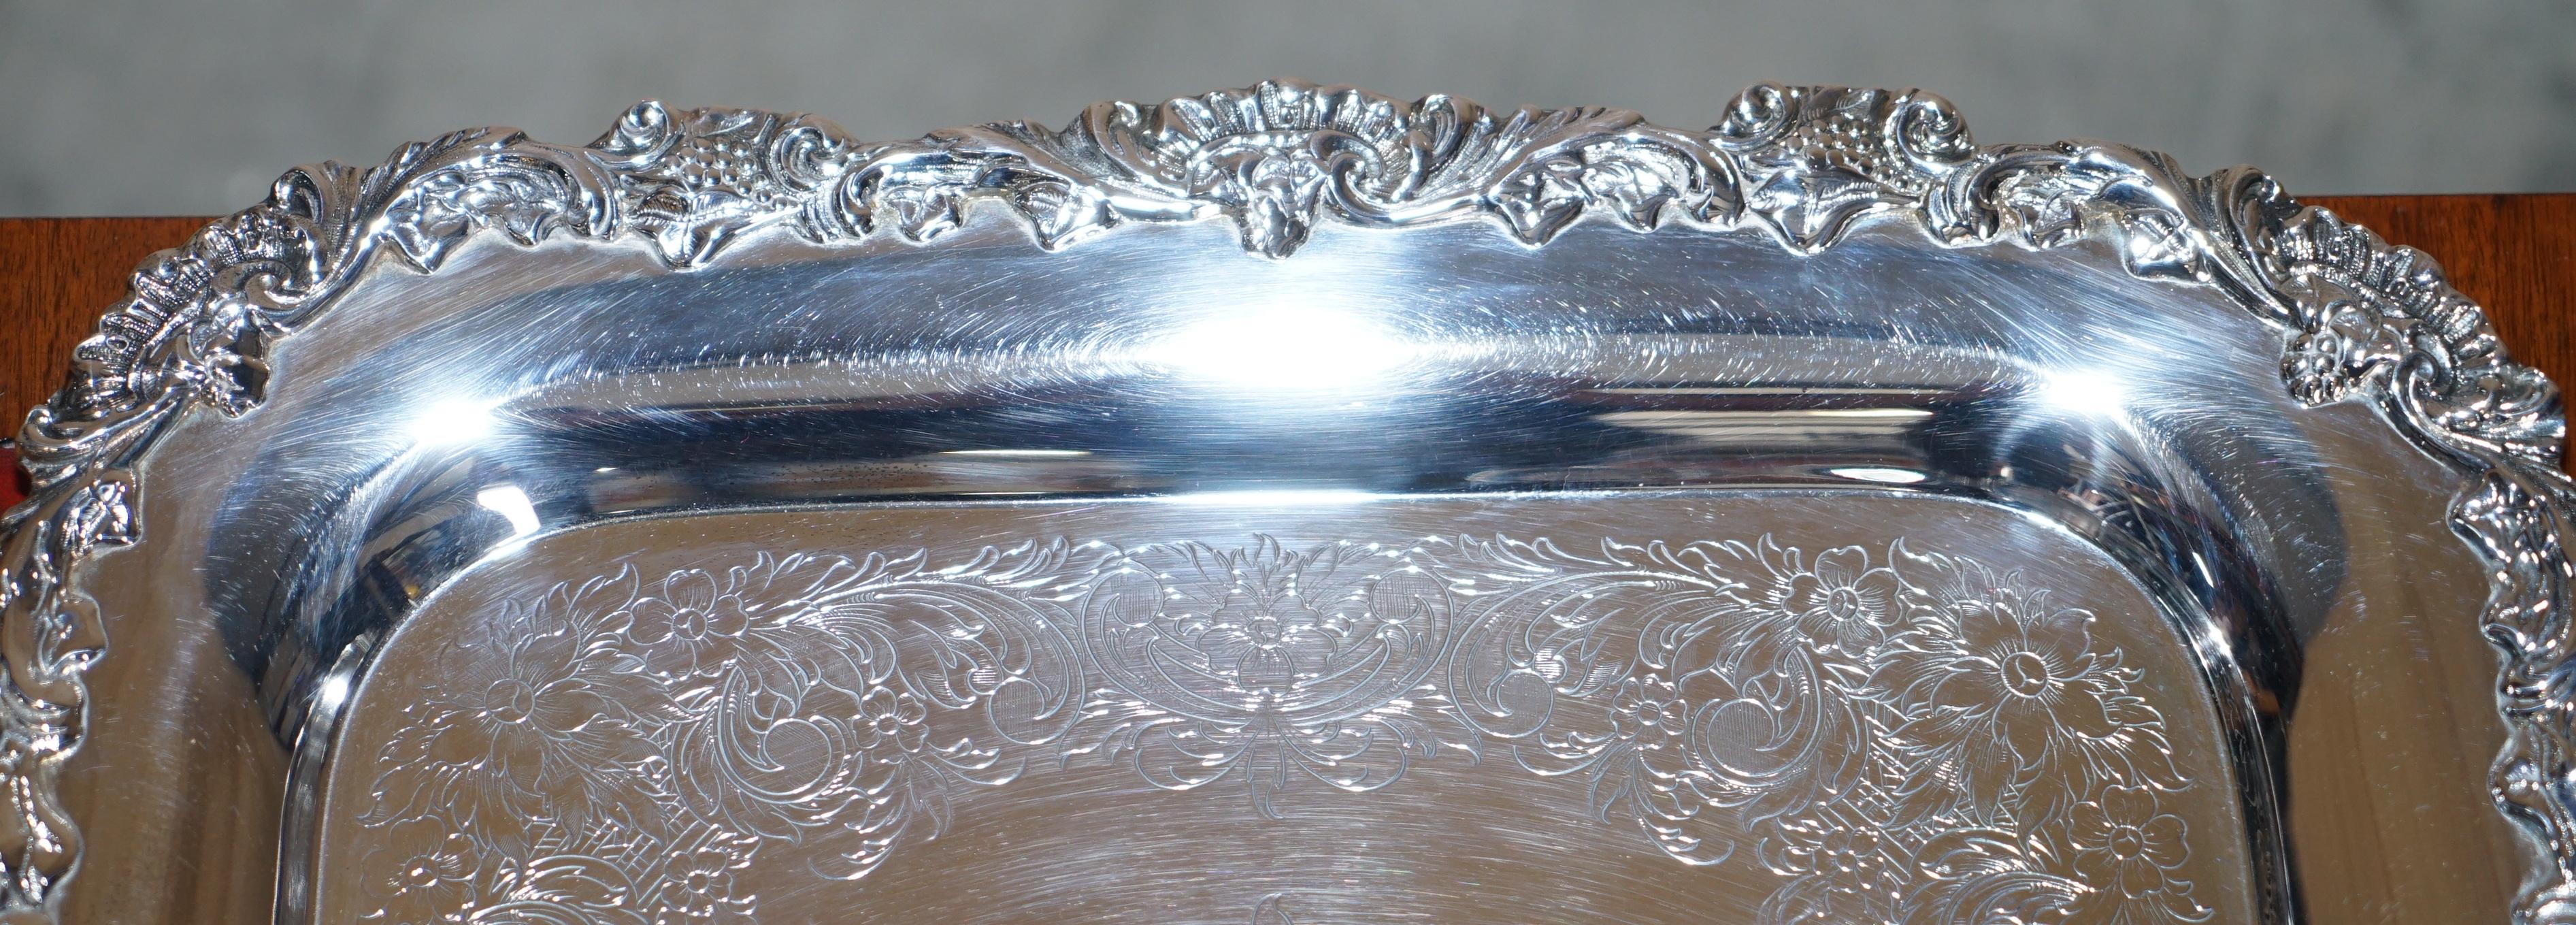 Chrome Stunning Vintage Webster Wilcox Sterling Silver Plated Wine Drinks Serving Tray For Sale